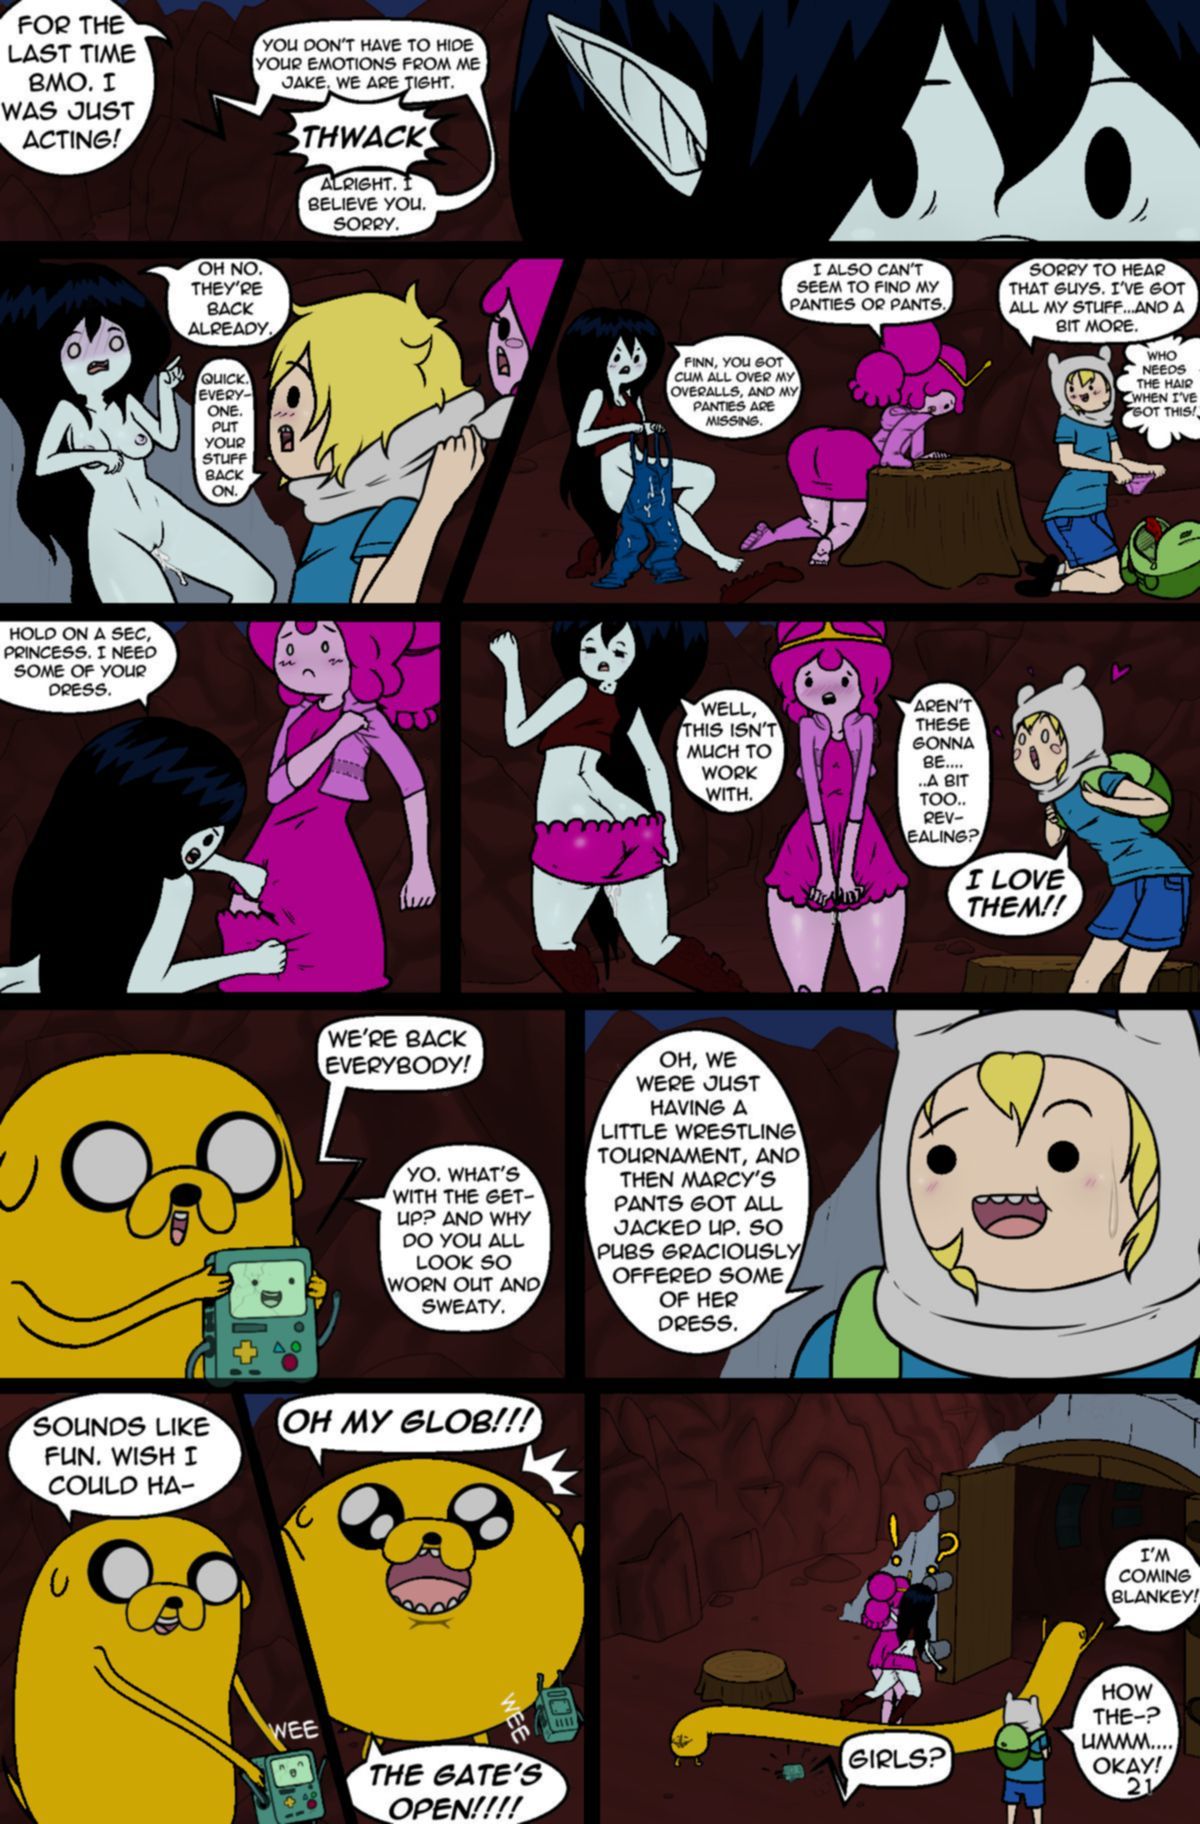 [cubbychambers] MisAdventure Time Issue #2 - What Was Missing (Adventure Time) color - part 2